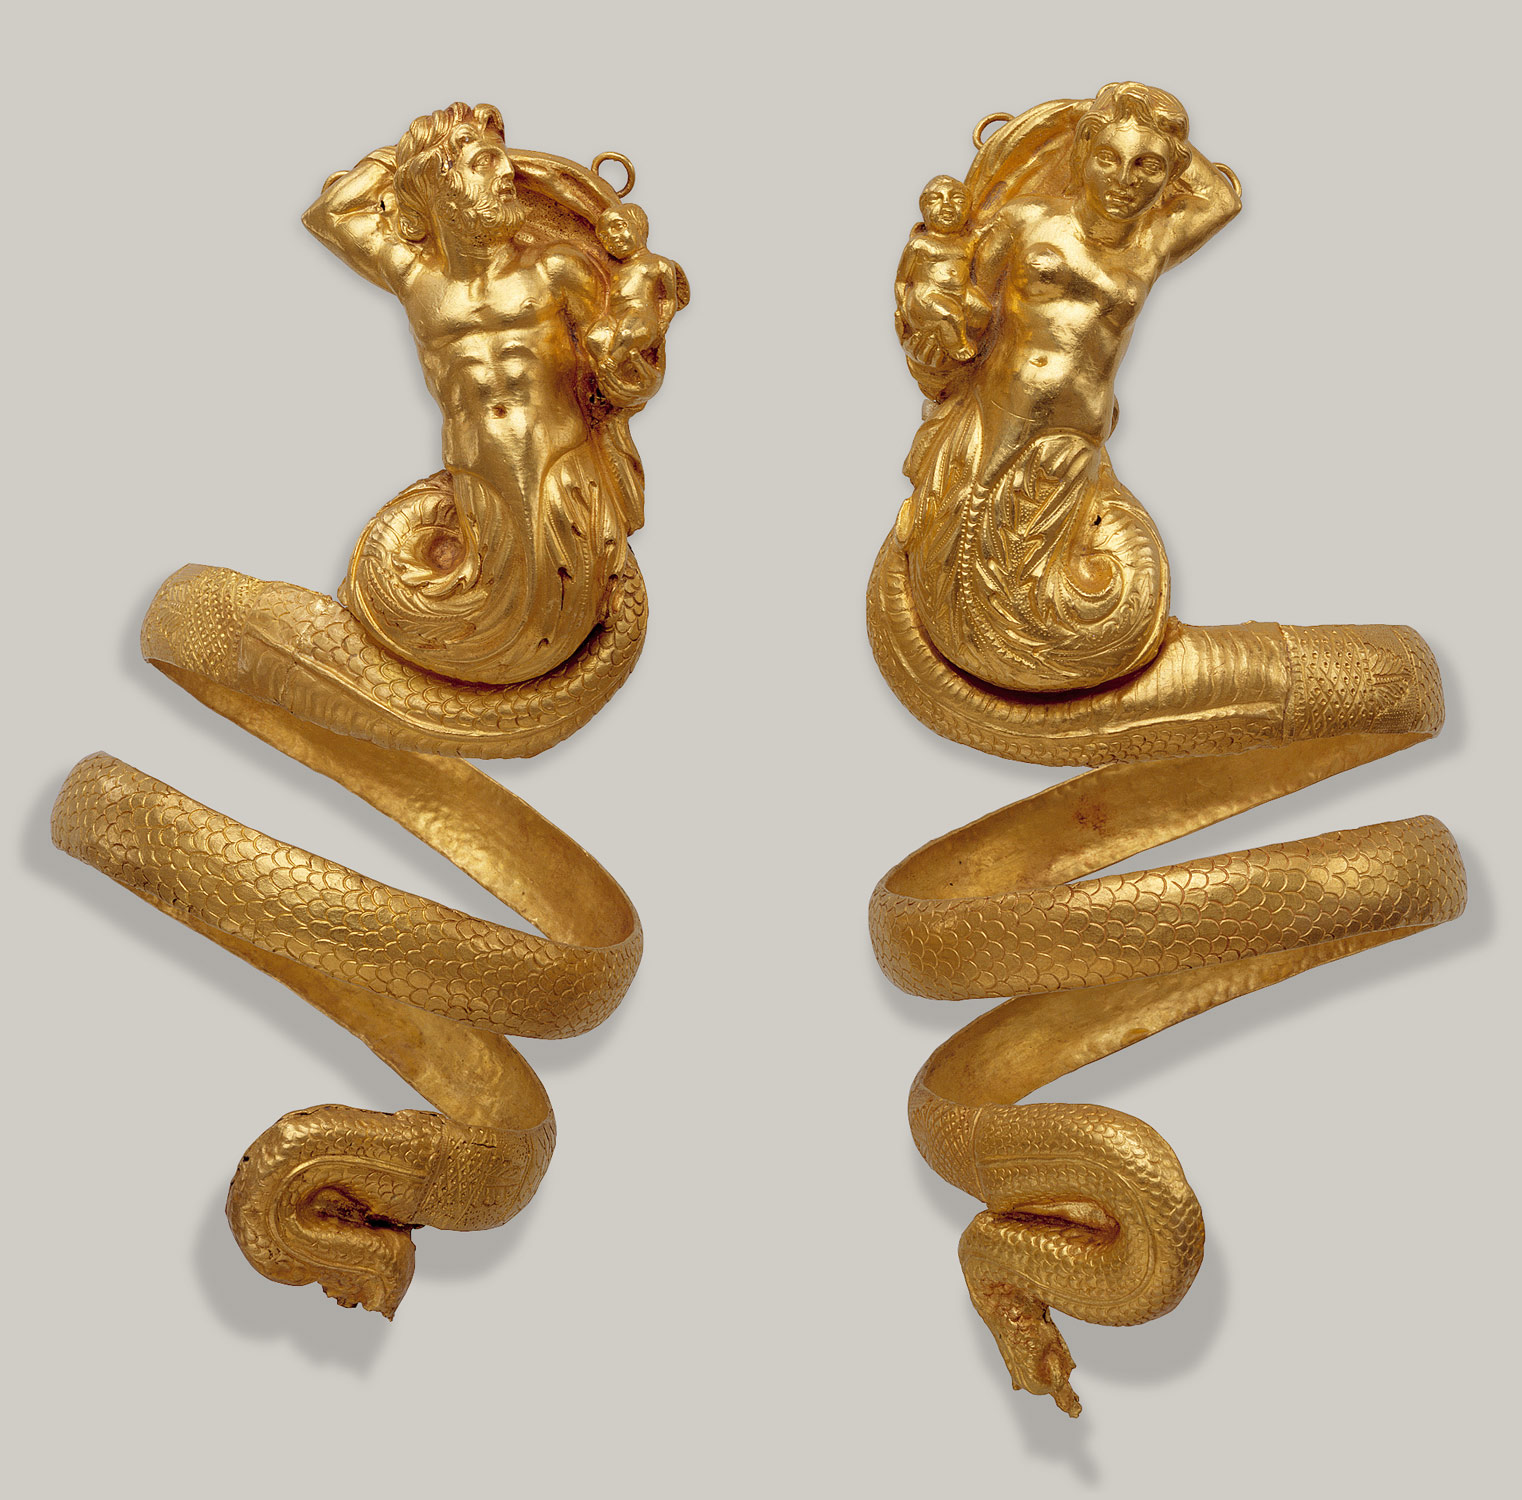 Pair of gold armbands